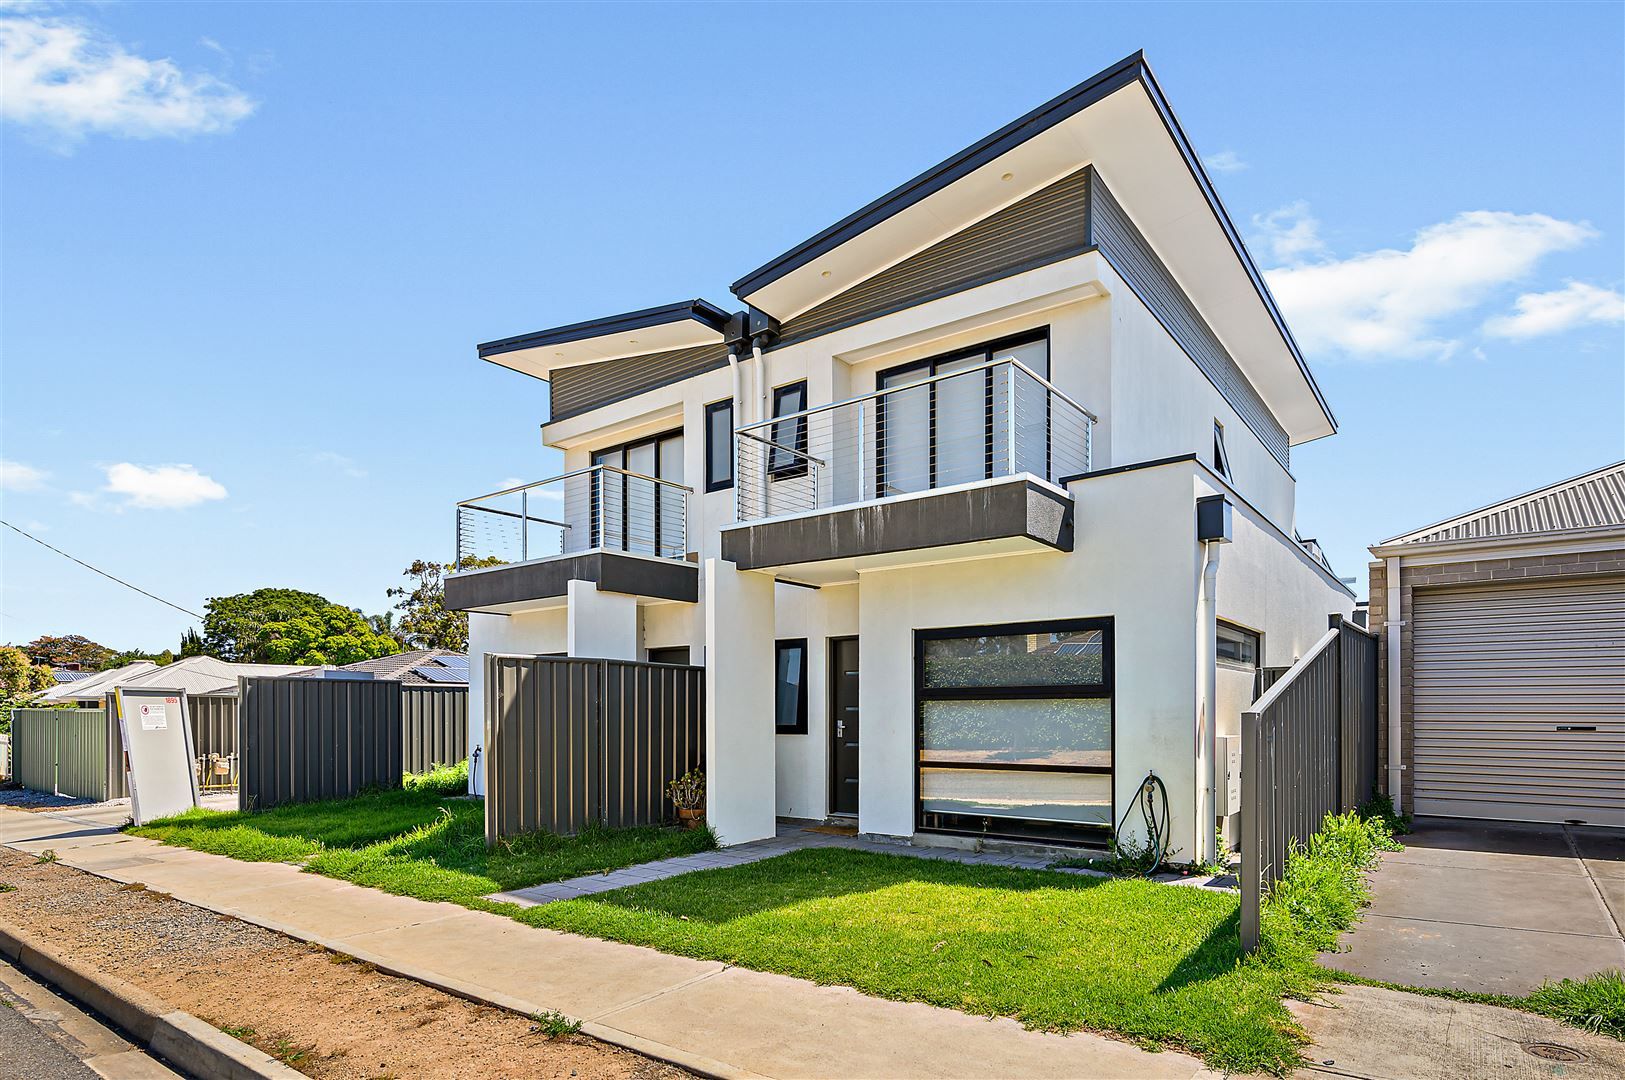 3 bedrooms Townhouse in 2/27 Archerfield Avenue CHRISTIES BEACH SA, 5165